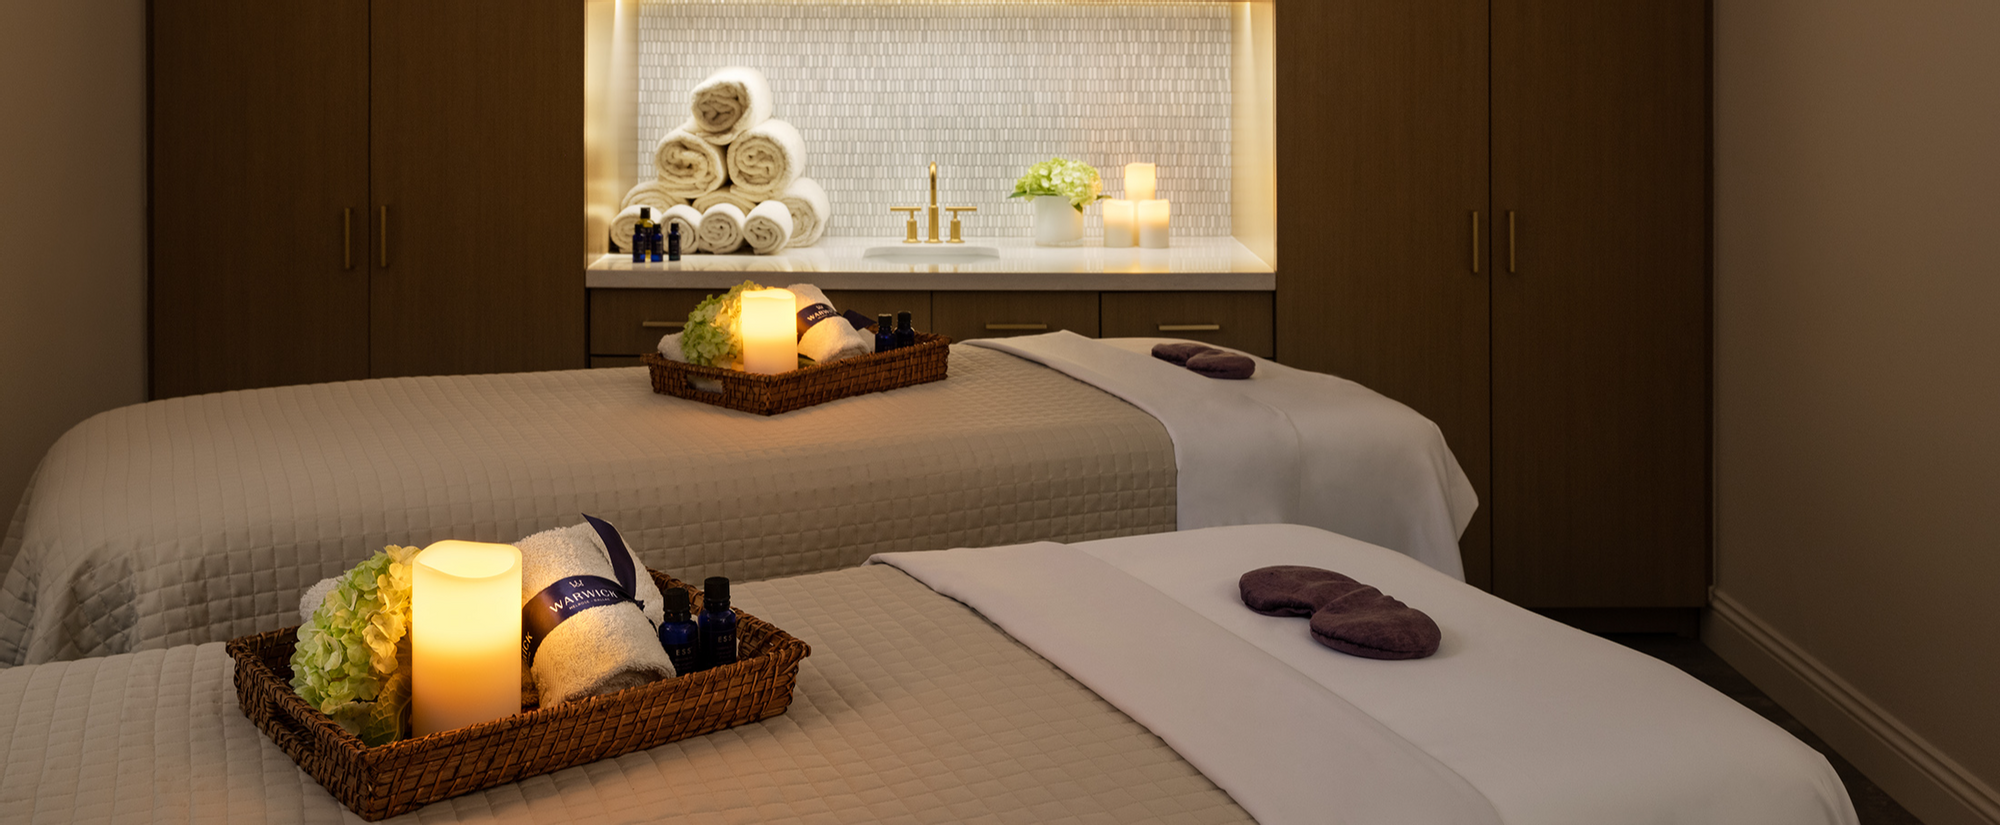 Le Spa by Warwick Melrose treatment room